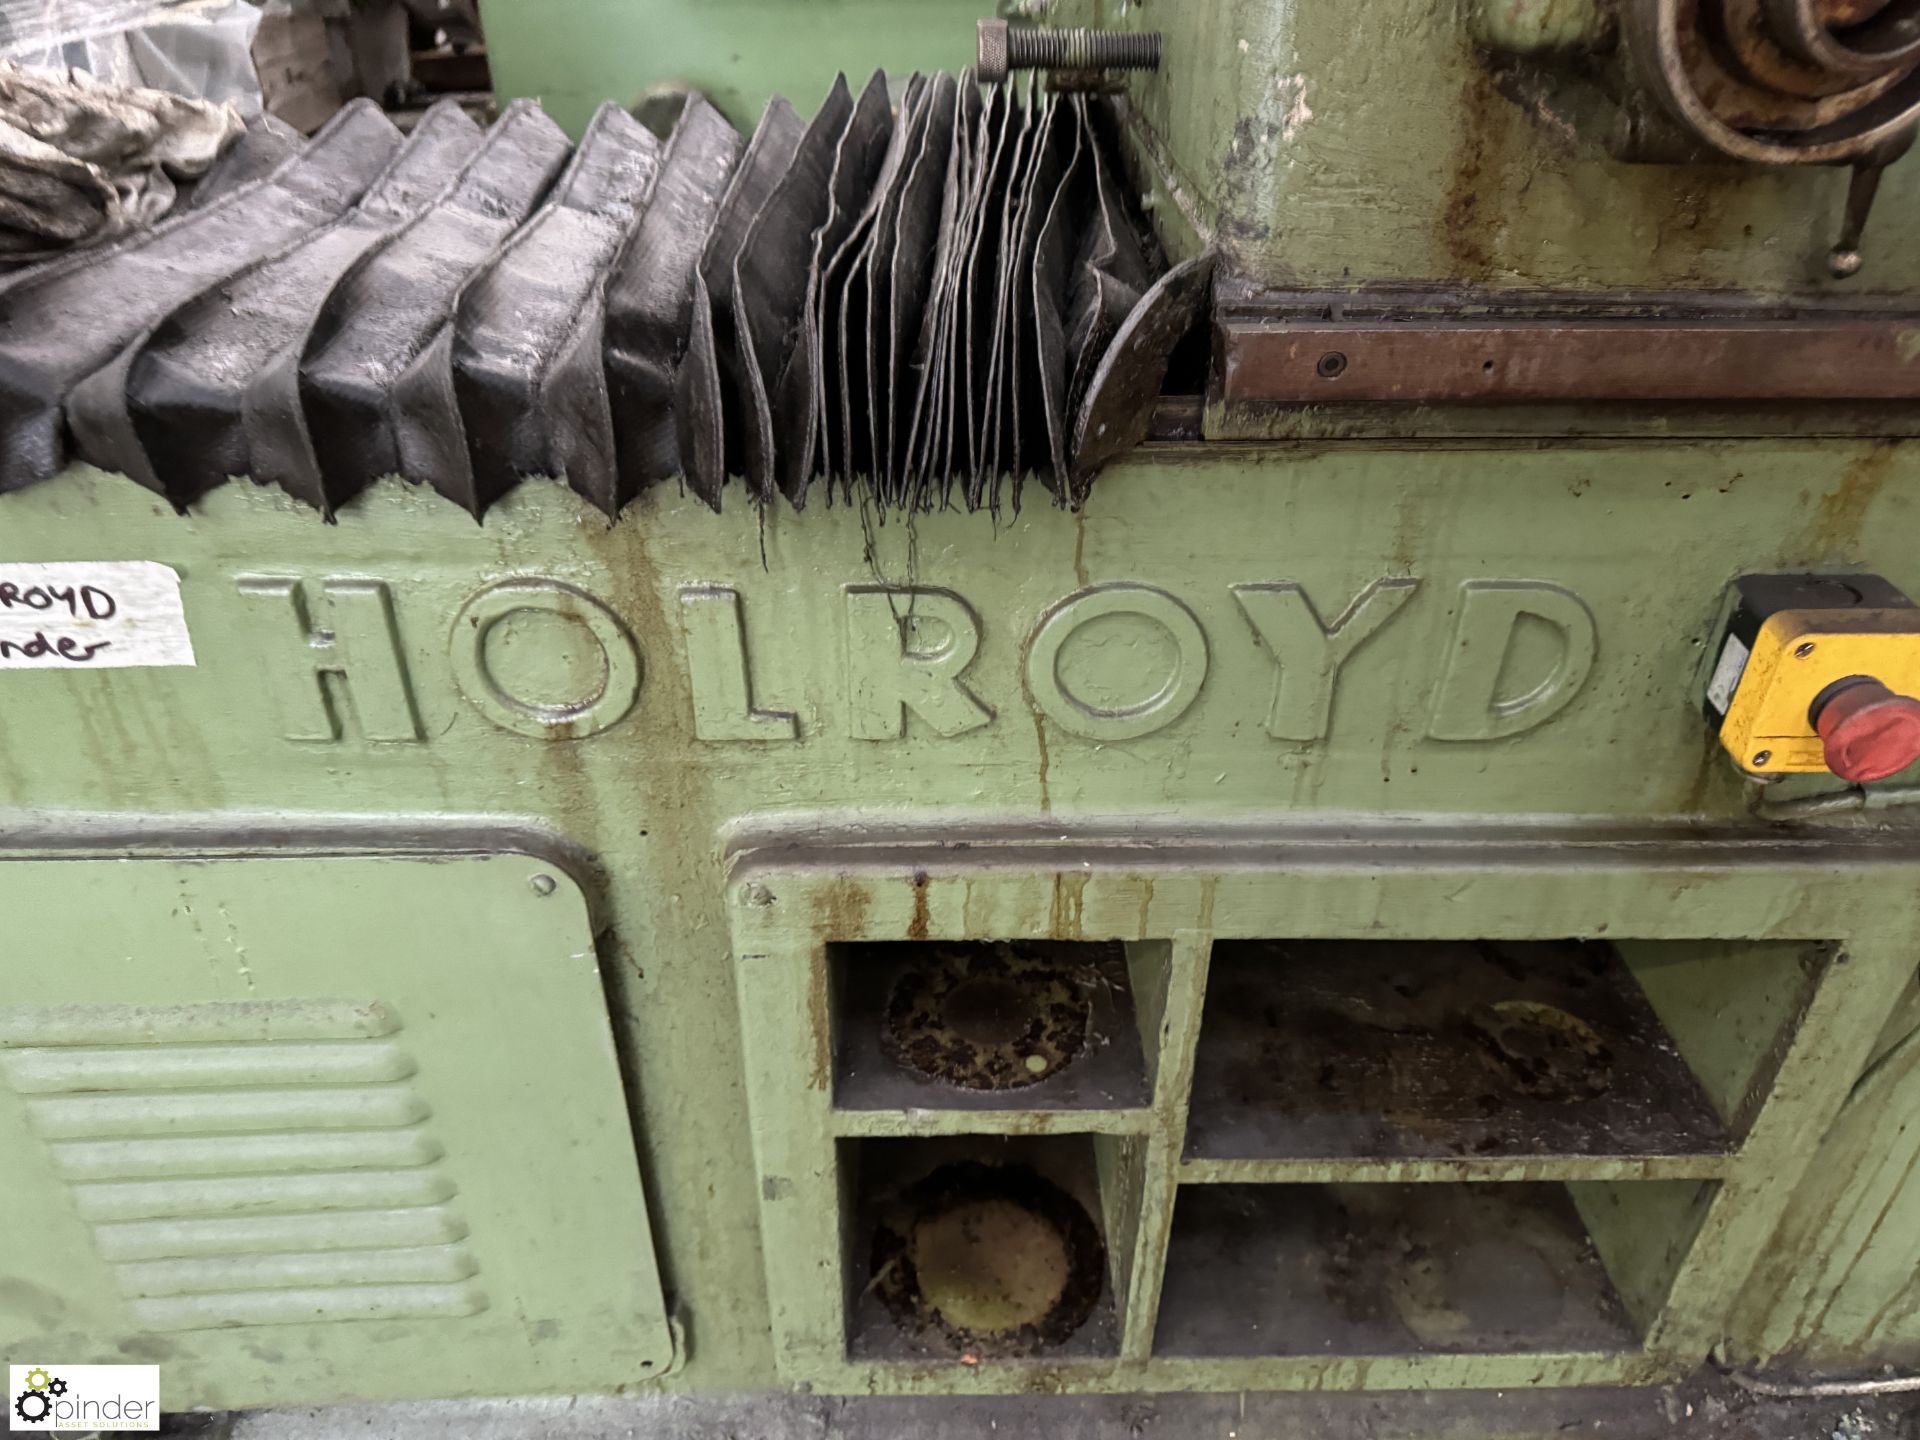 Holroyd Worm Grinding Machine, patent 2349, year 1969, 14in x 36in capacity (please note there - Image 3 of 11